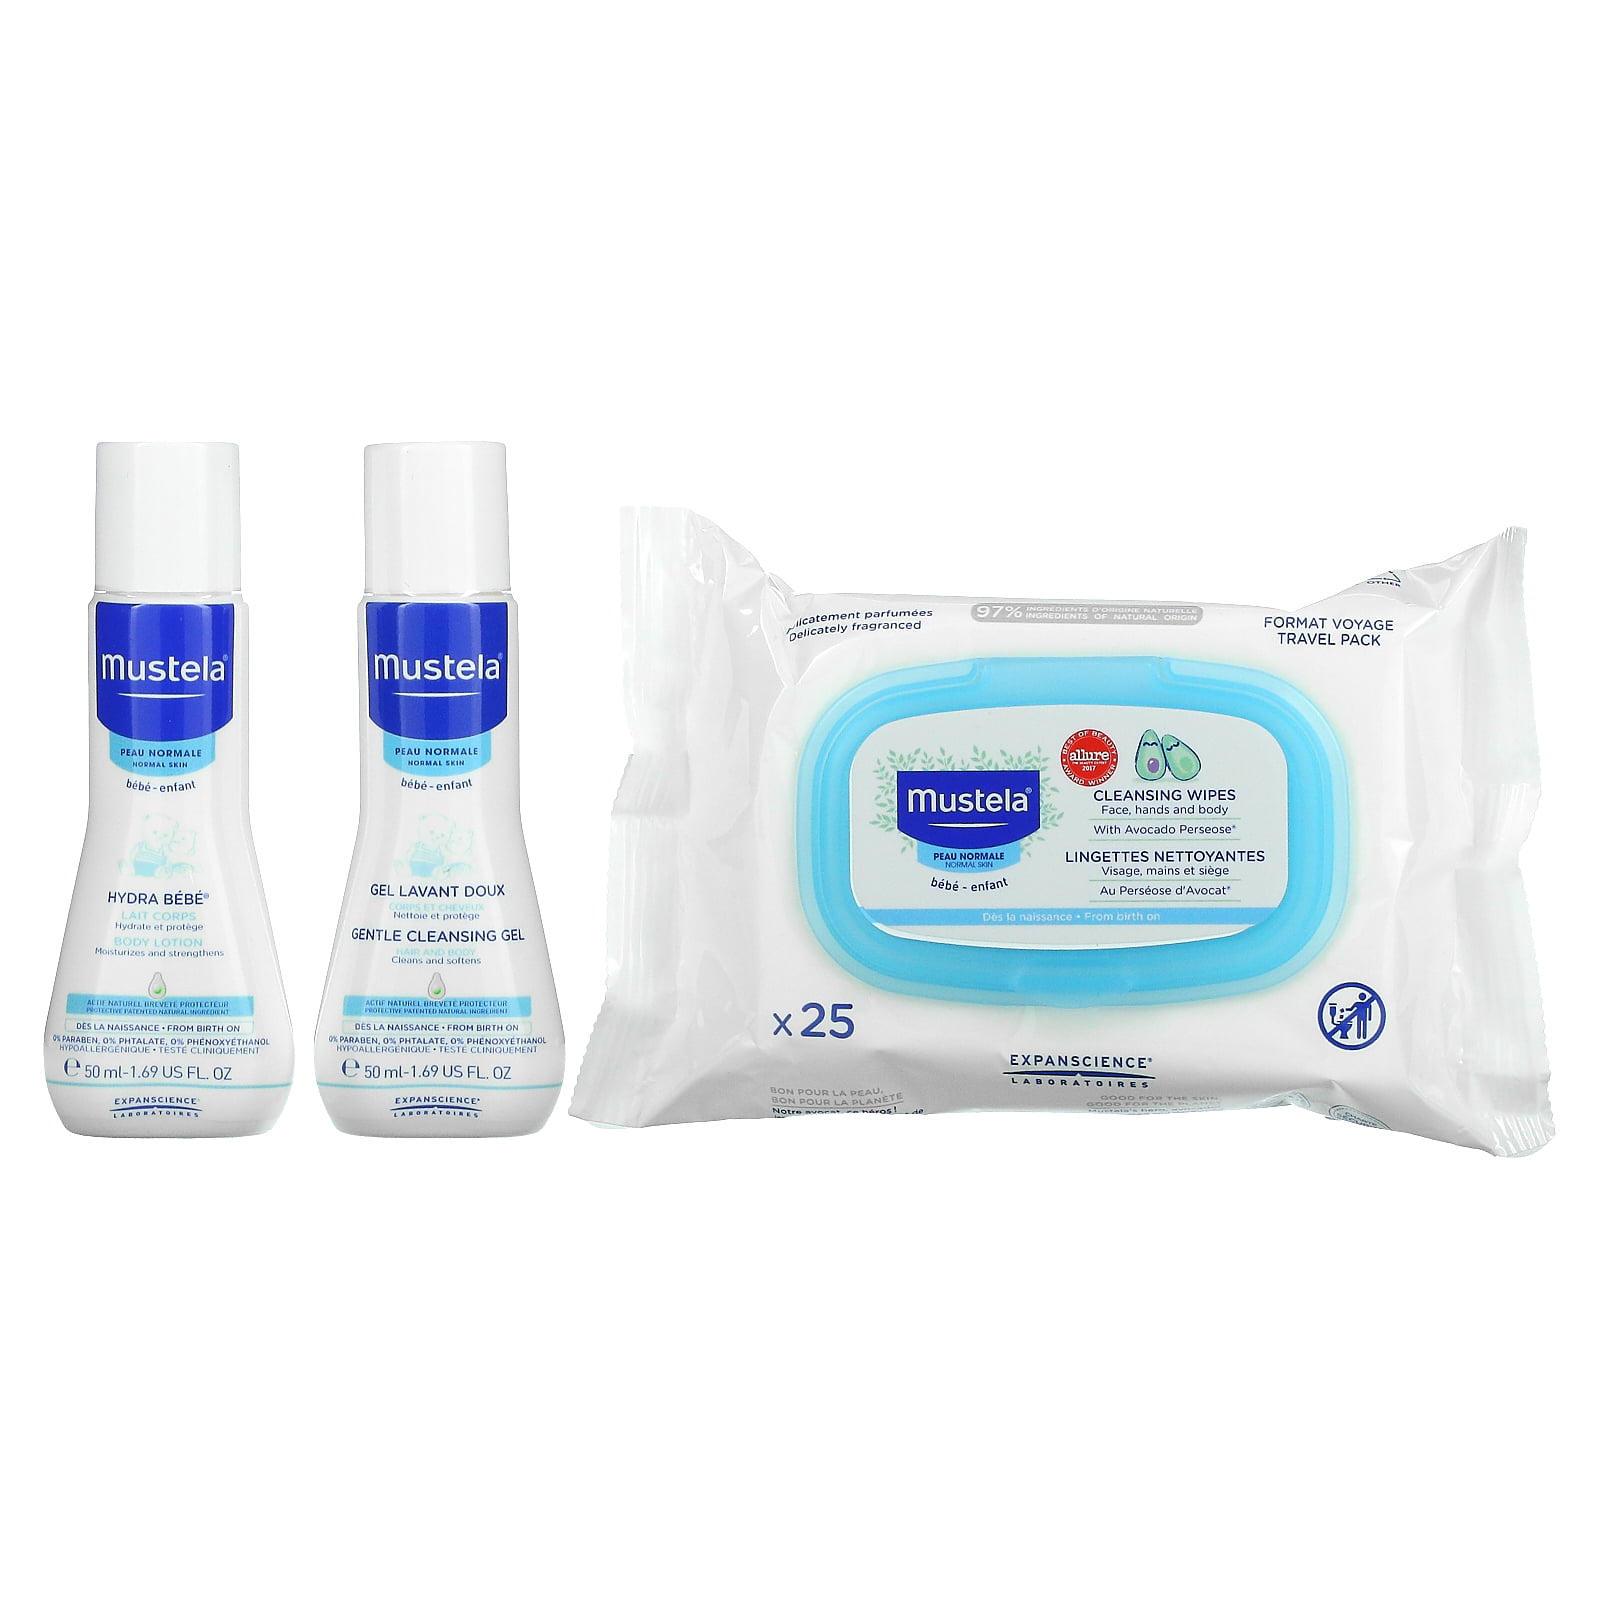 Mustela Review + WIN a prize pack - My Bored Toddler